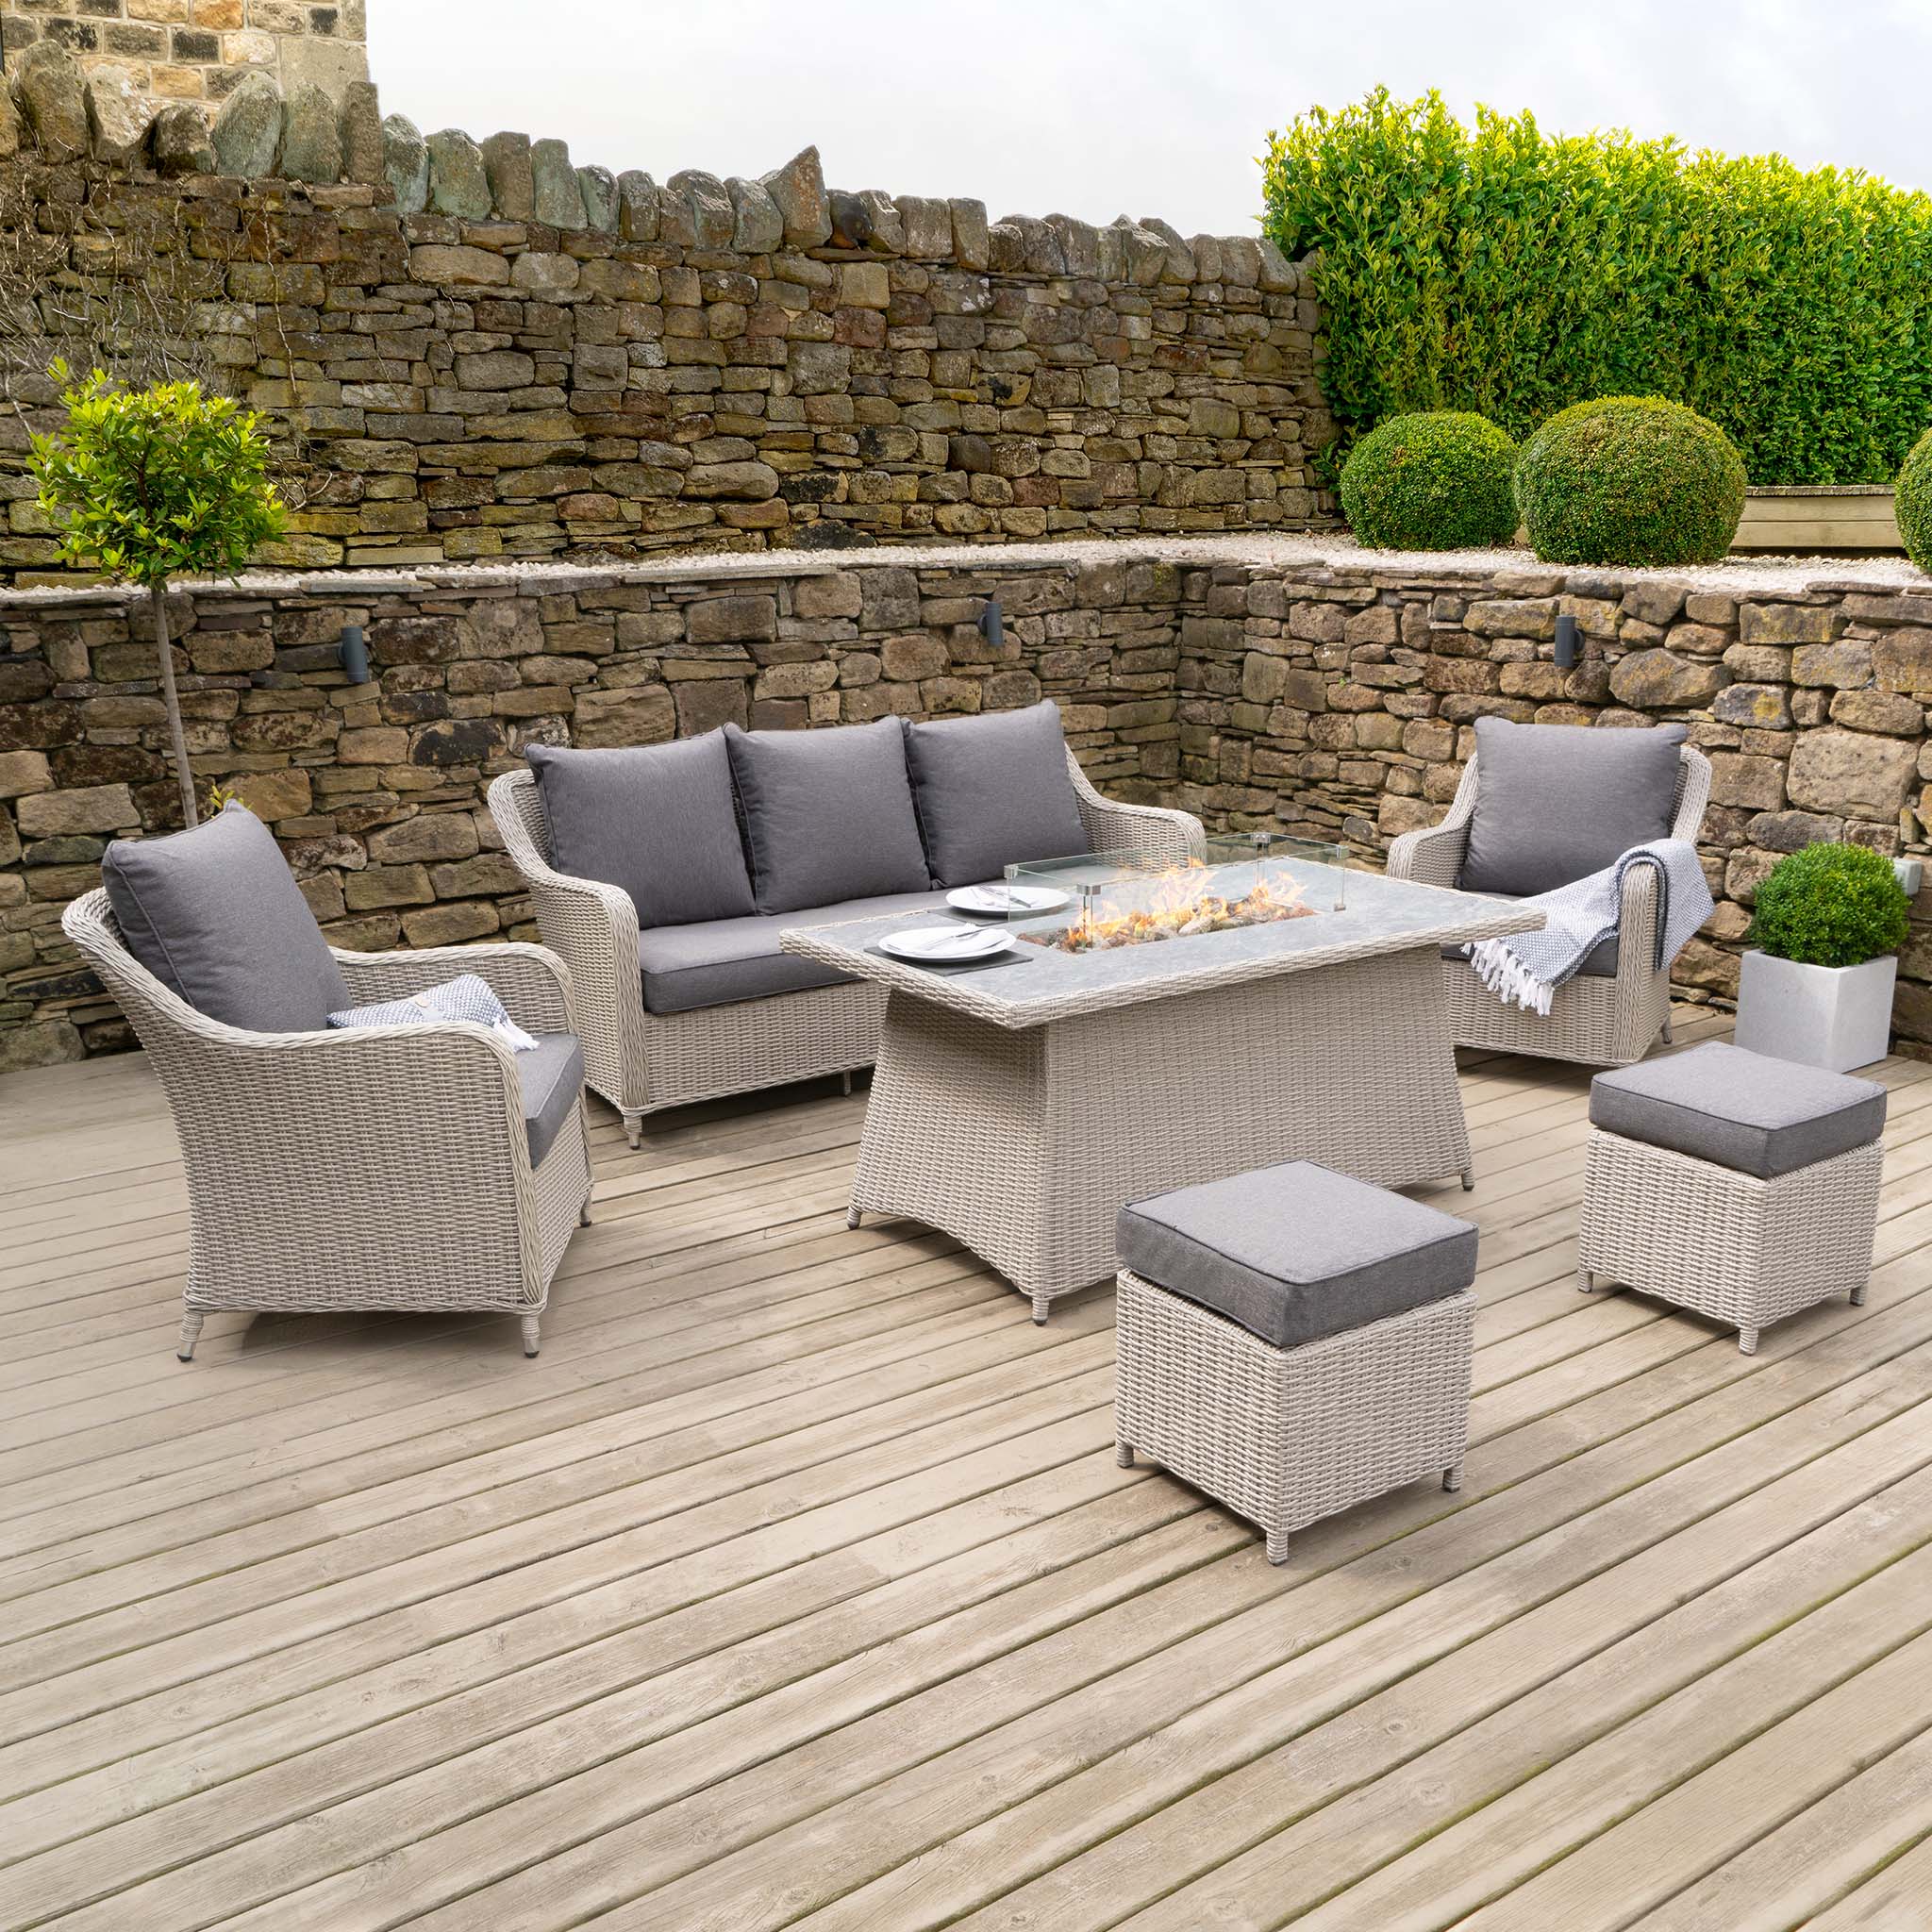 Antigua 3 Seat Rattan Sofa Dining Set with Firepit Table in Stone Grey